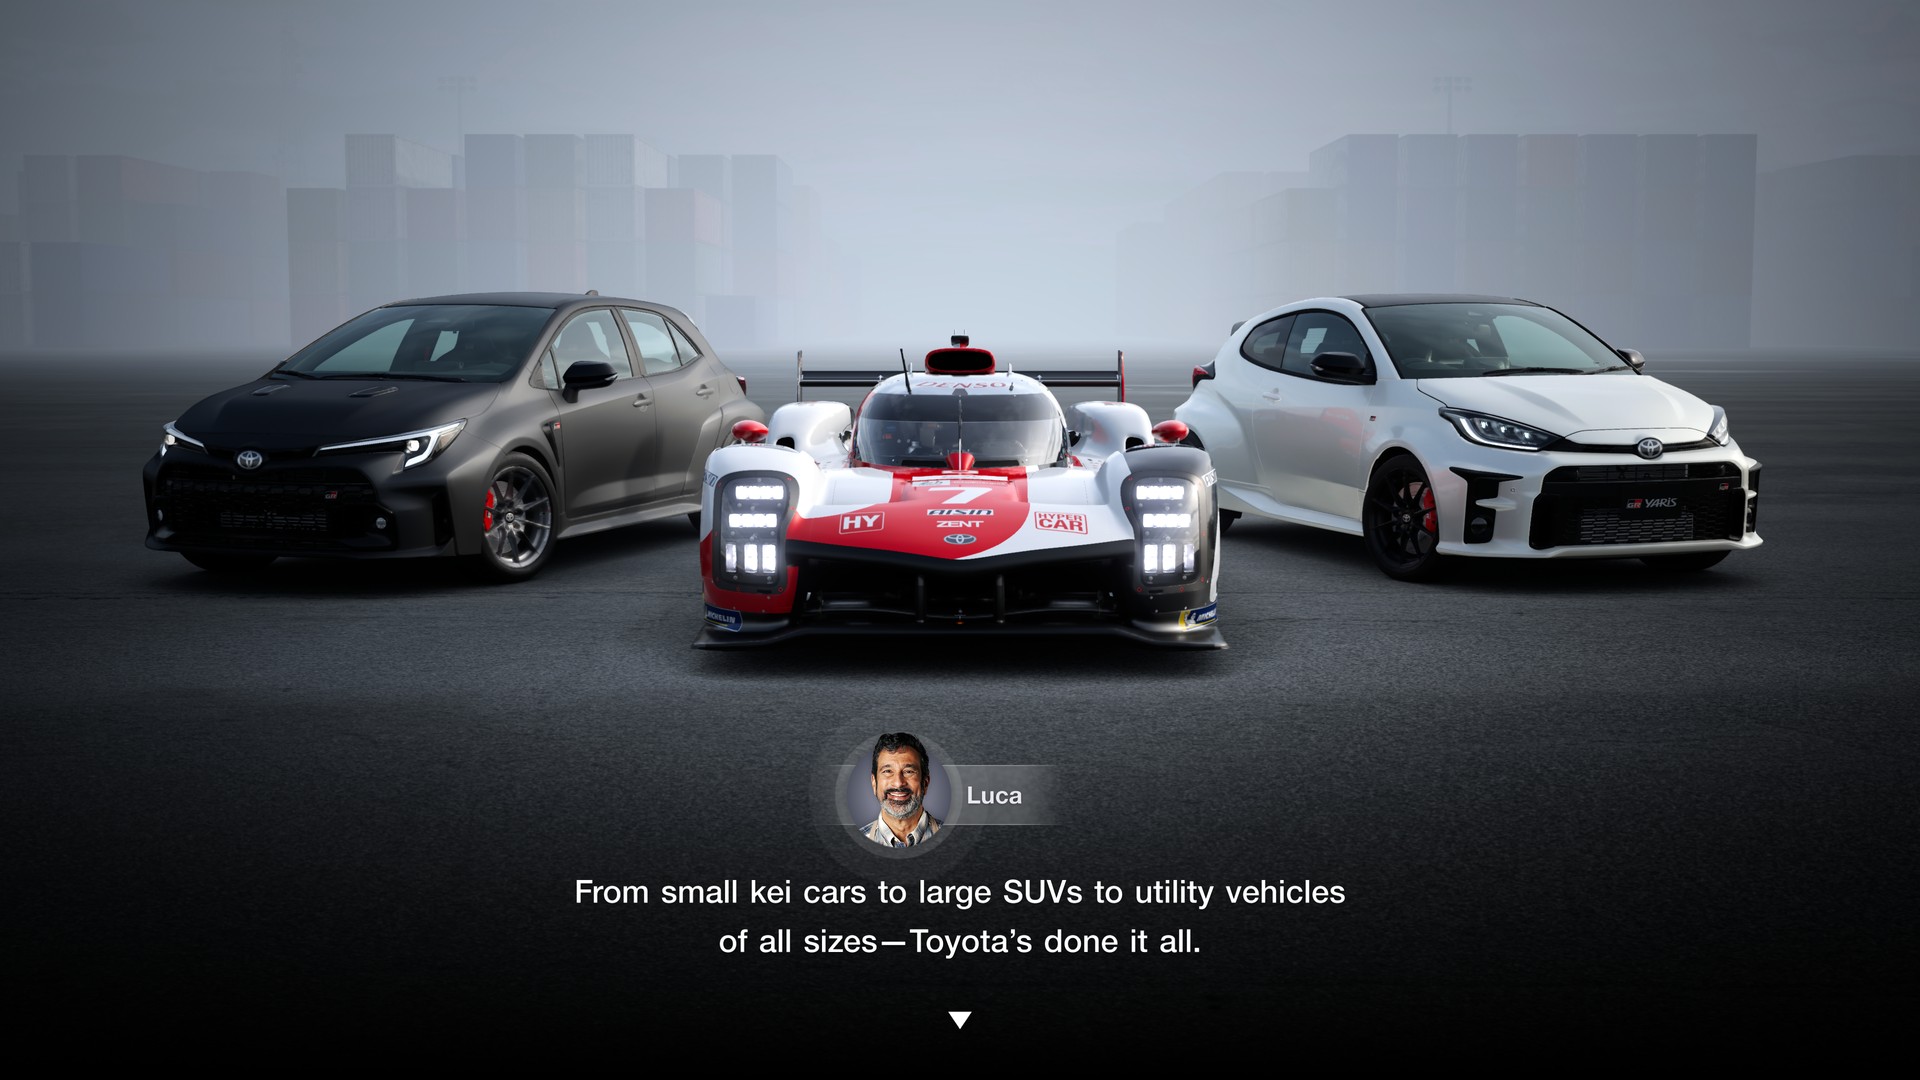 Gran Turismo 7 Free Update Adds 3 New Cars & More